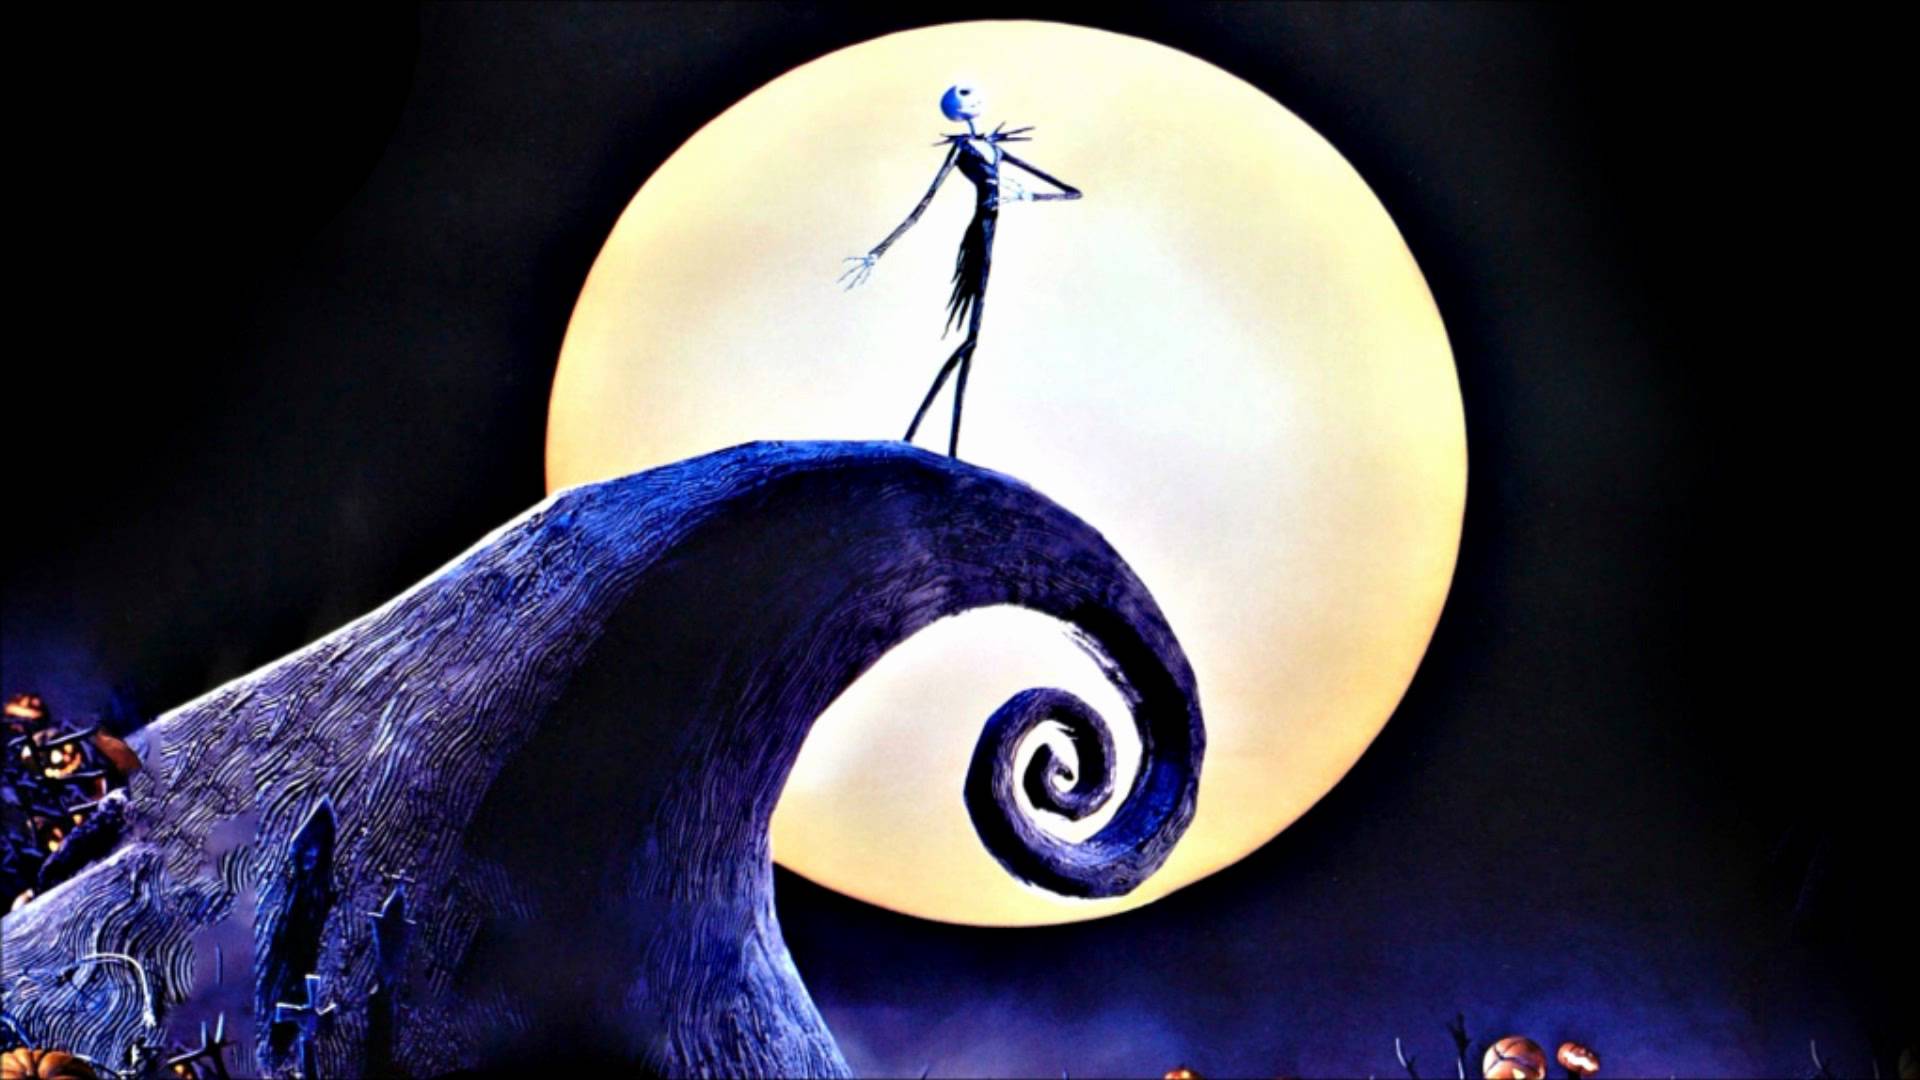 Wallpapers For > Nightmare Before Christmas Jack And Sally Desktop